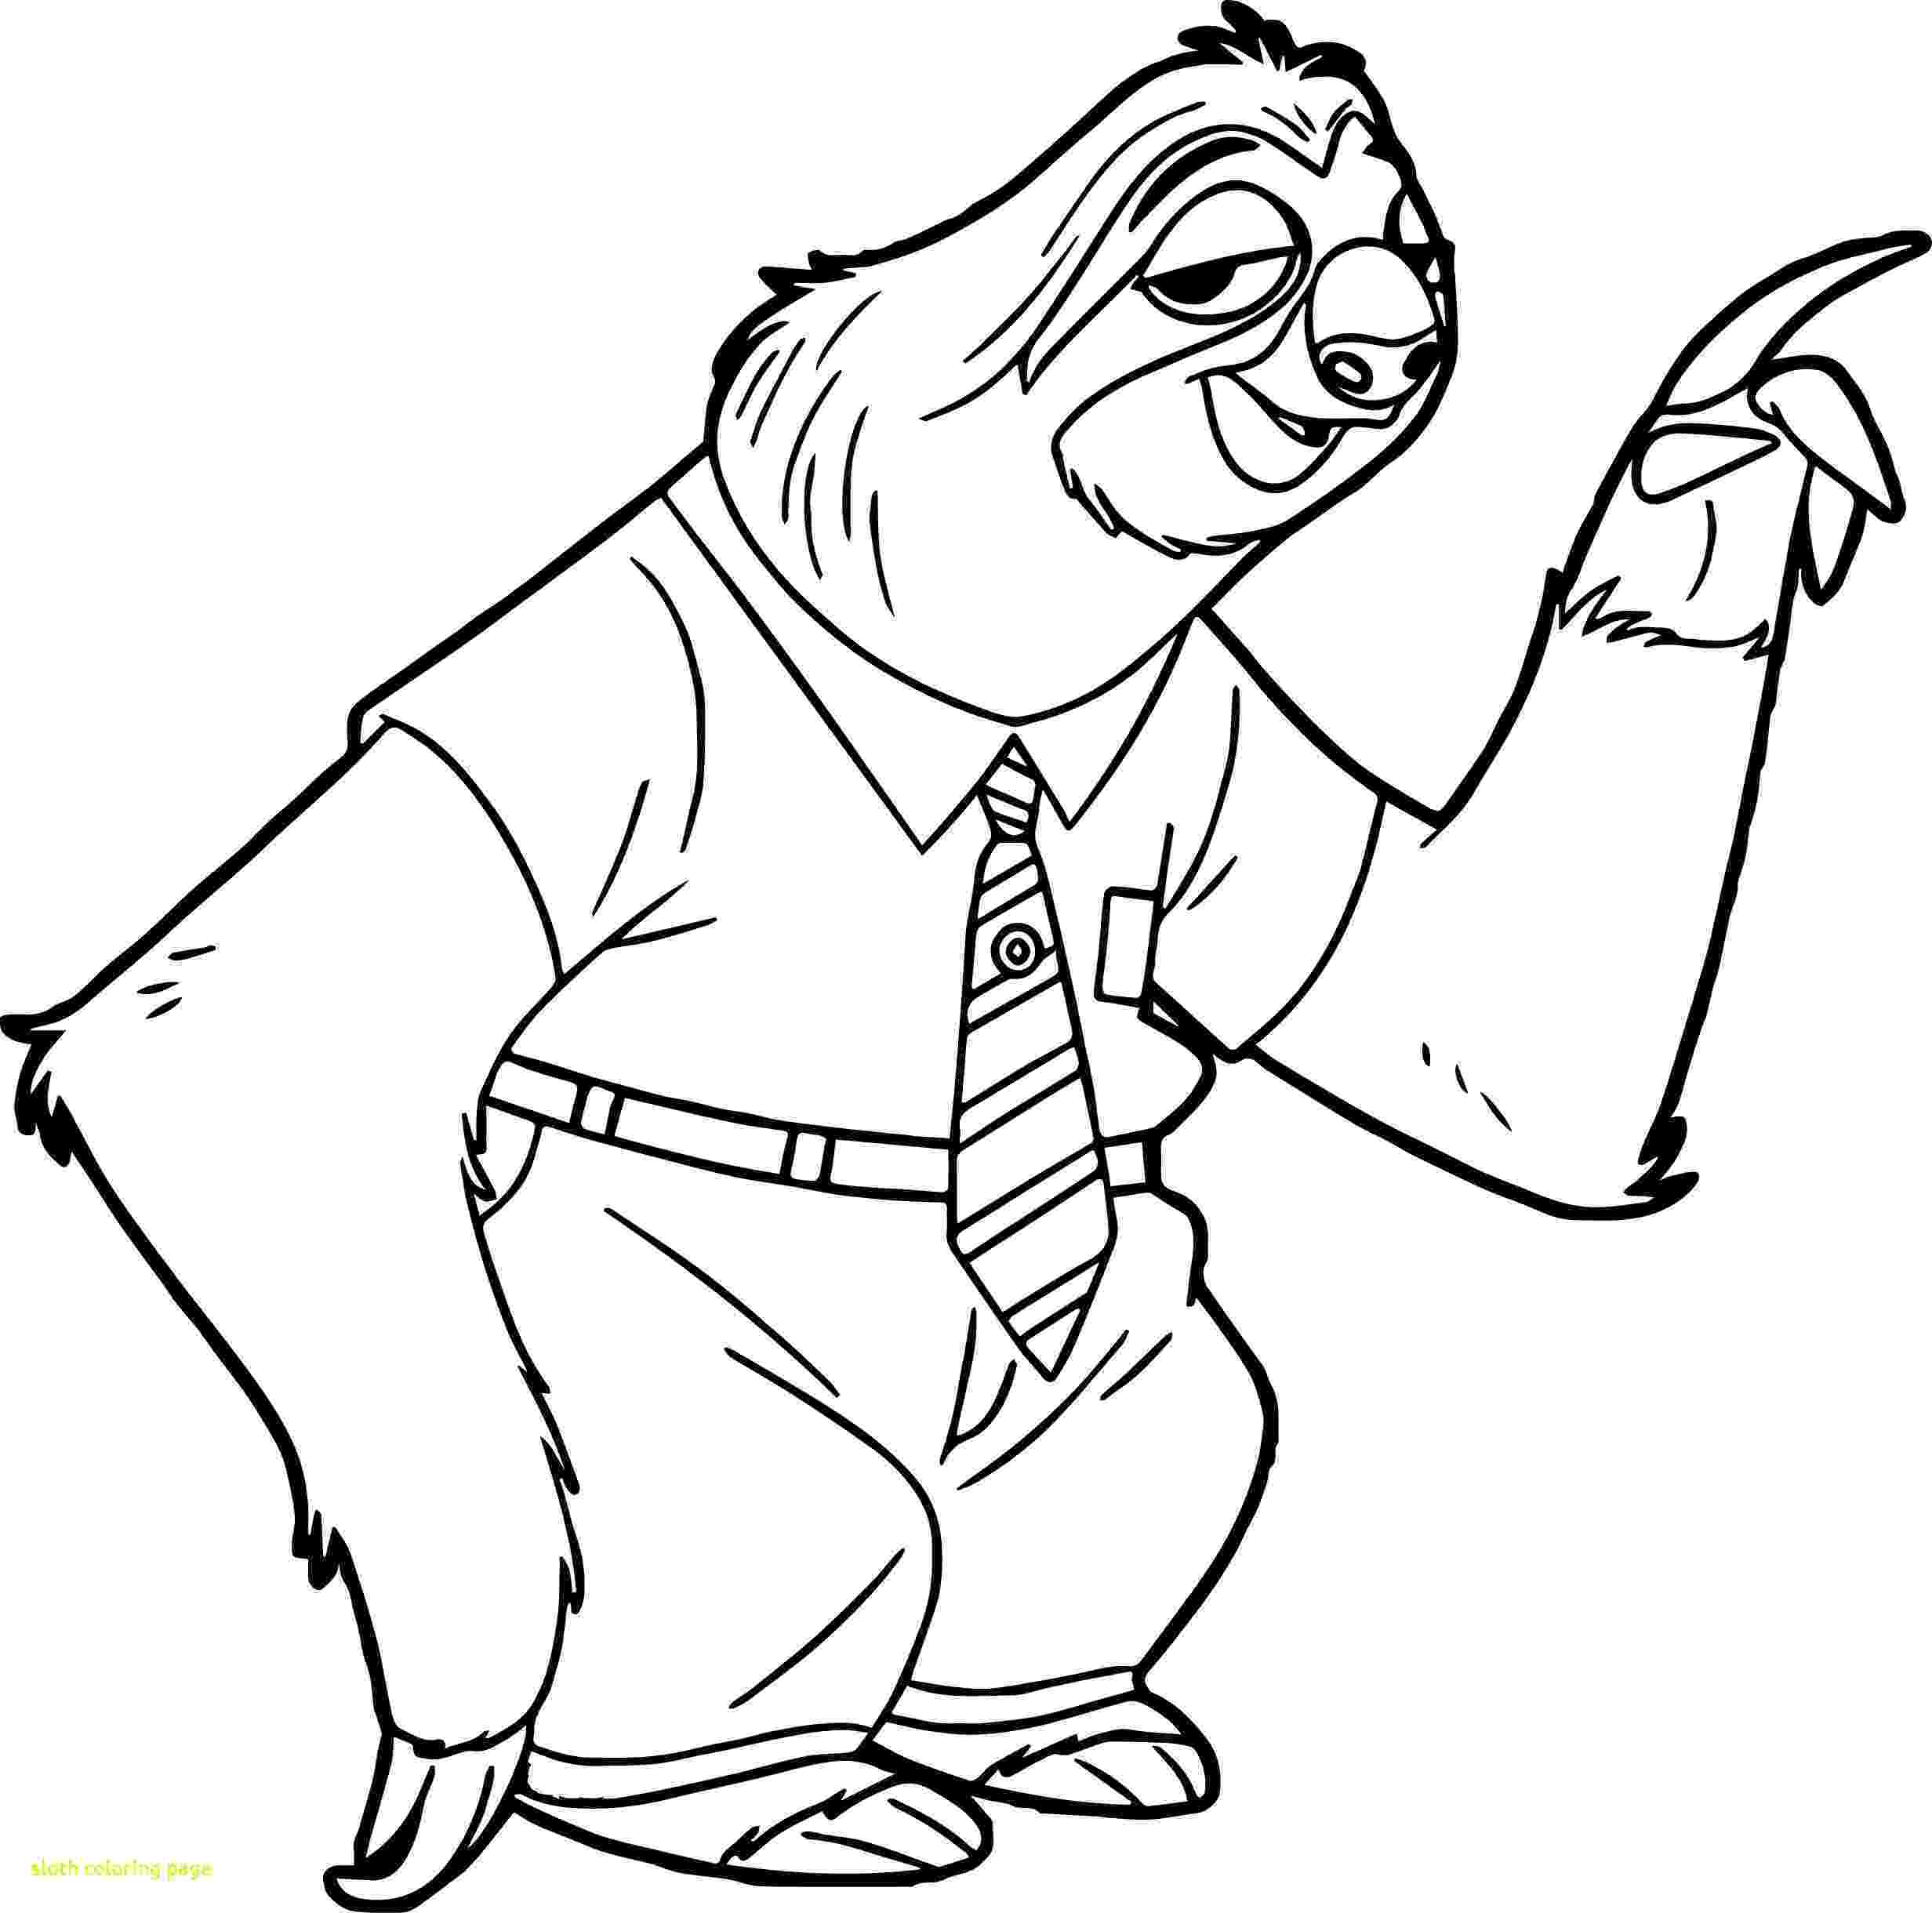 sloth coloring pages adult coloring page baby sloths in the rainforest download pages coloring sloth 